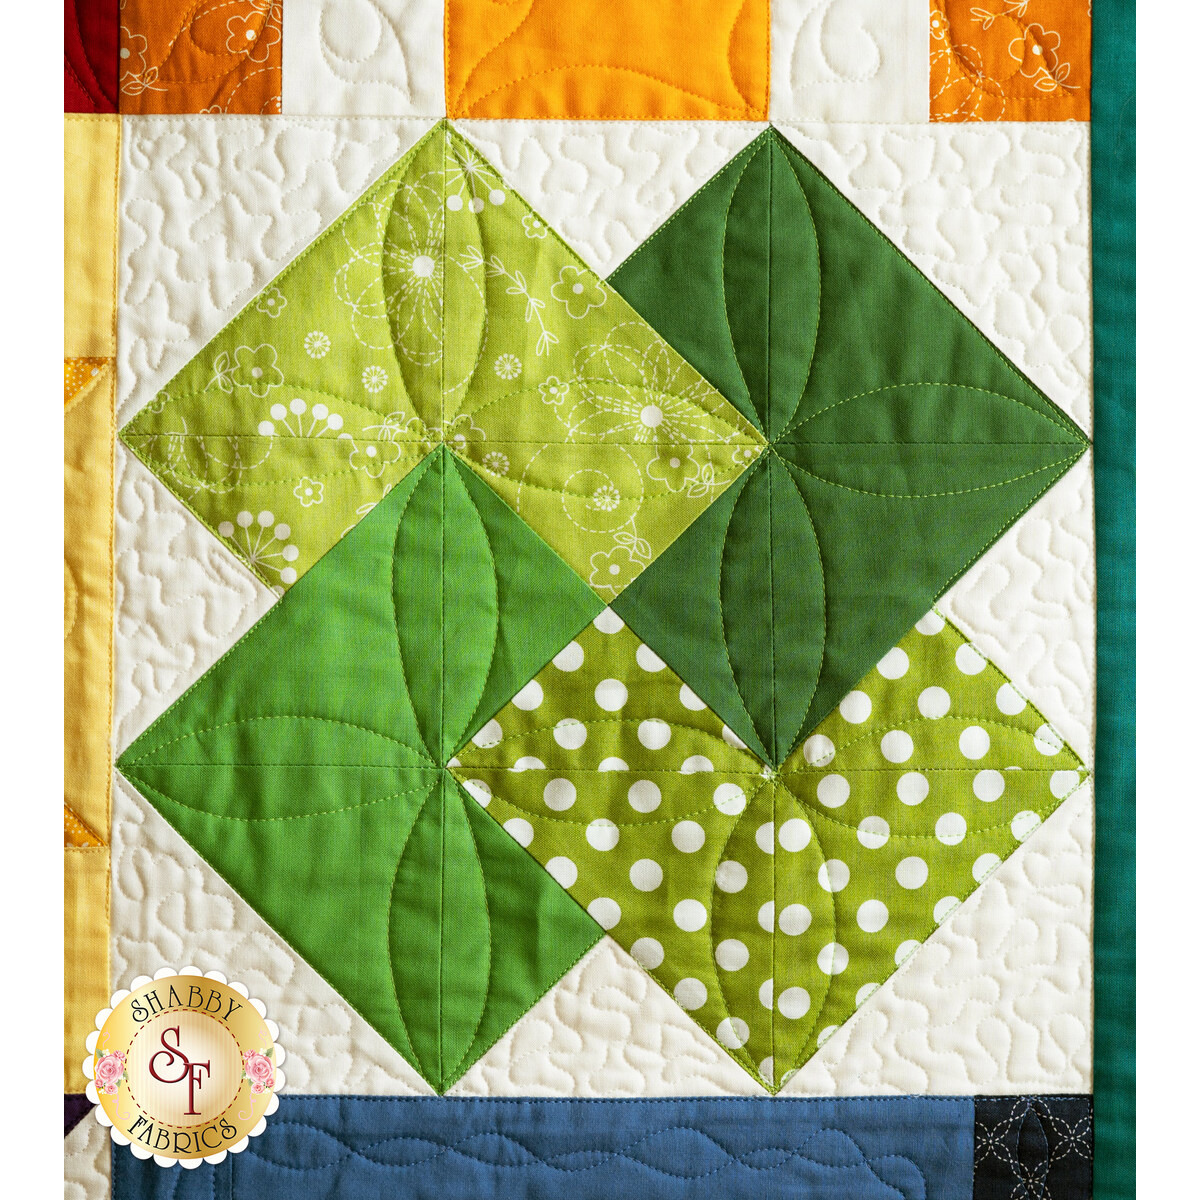 15+ Easy and Free Quilt Patterns for Beginners, by Hari Guide